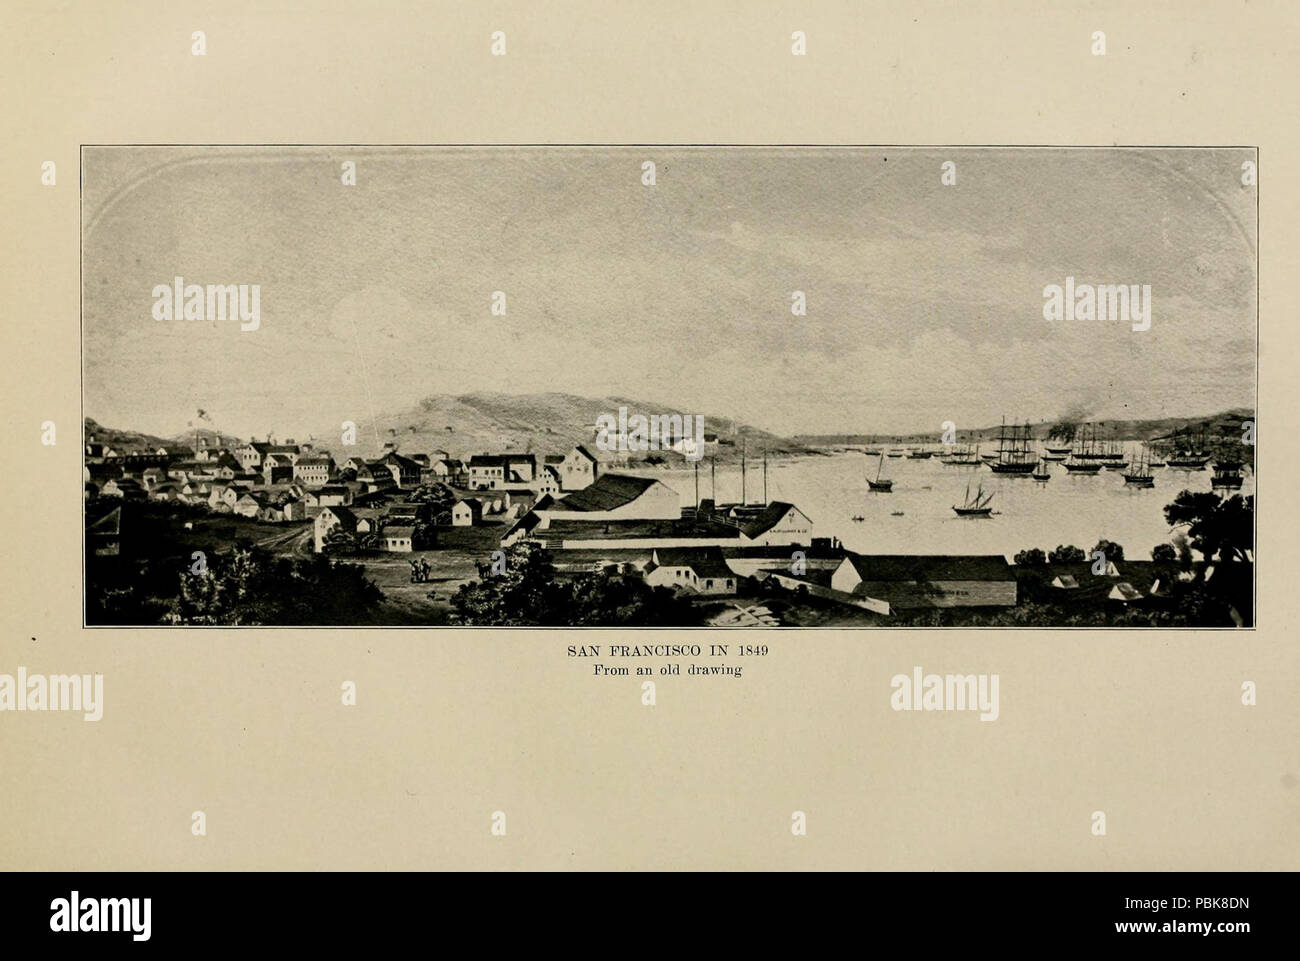 1289 Sanfranciscohist01youn 0135 San Francisco in 1849, from an old drawing Stock Photo